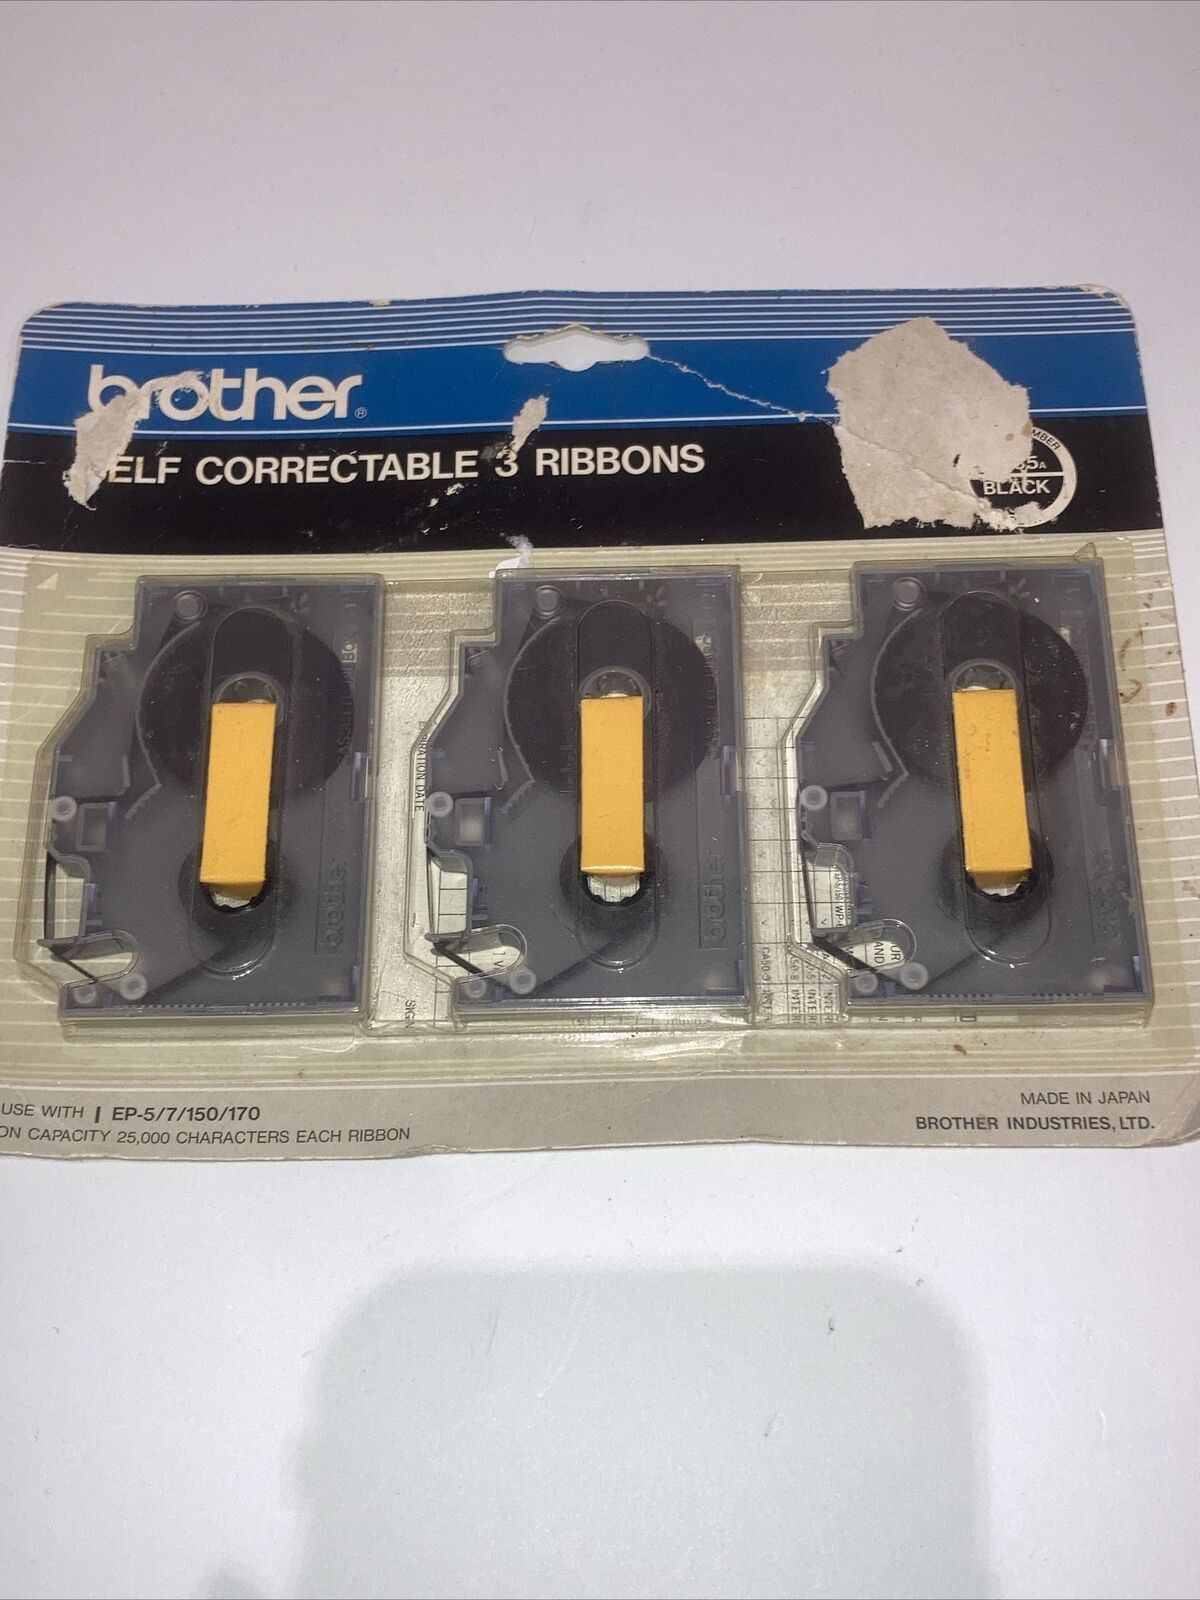 EP-5/7/150/170 self correctable ribbons 3 pack Type Writer